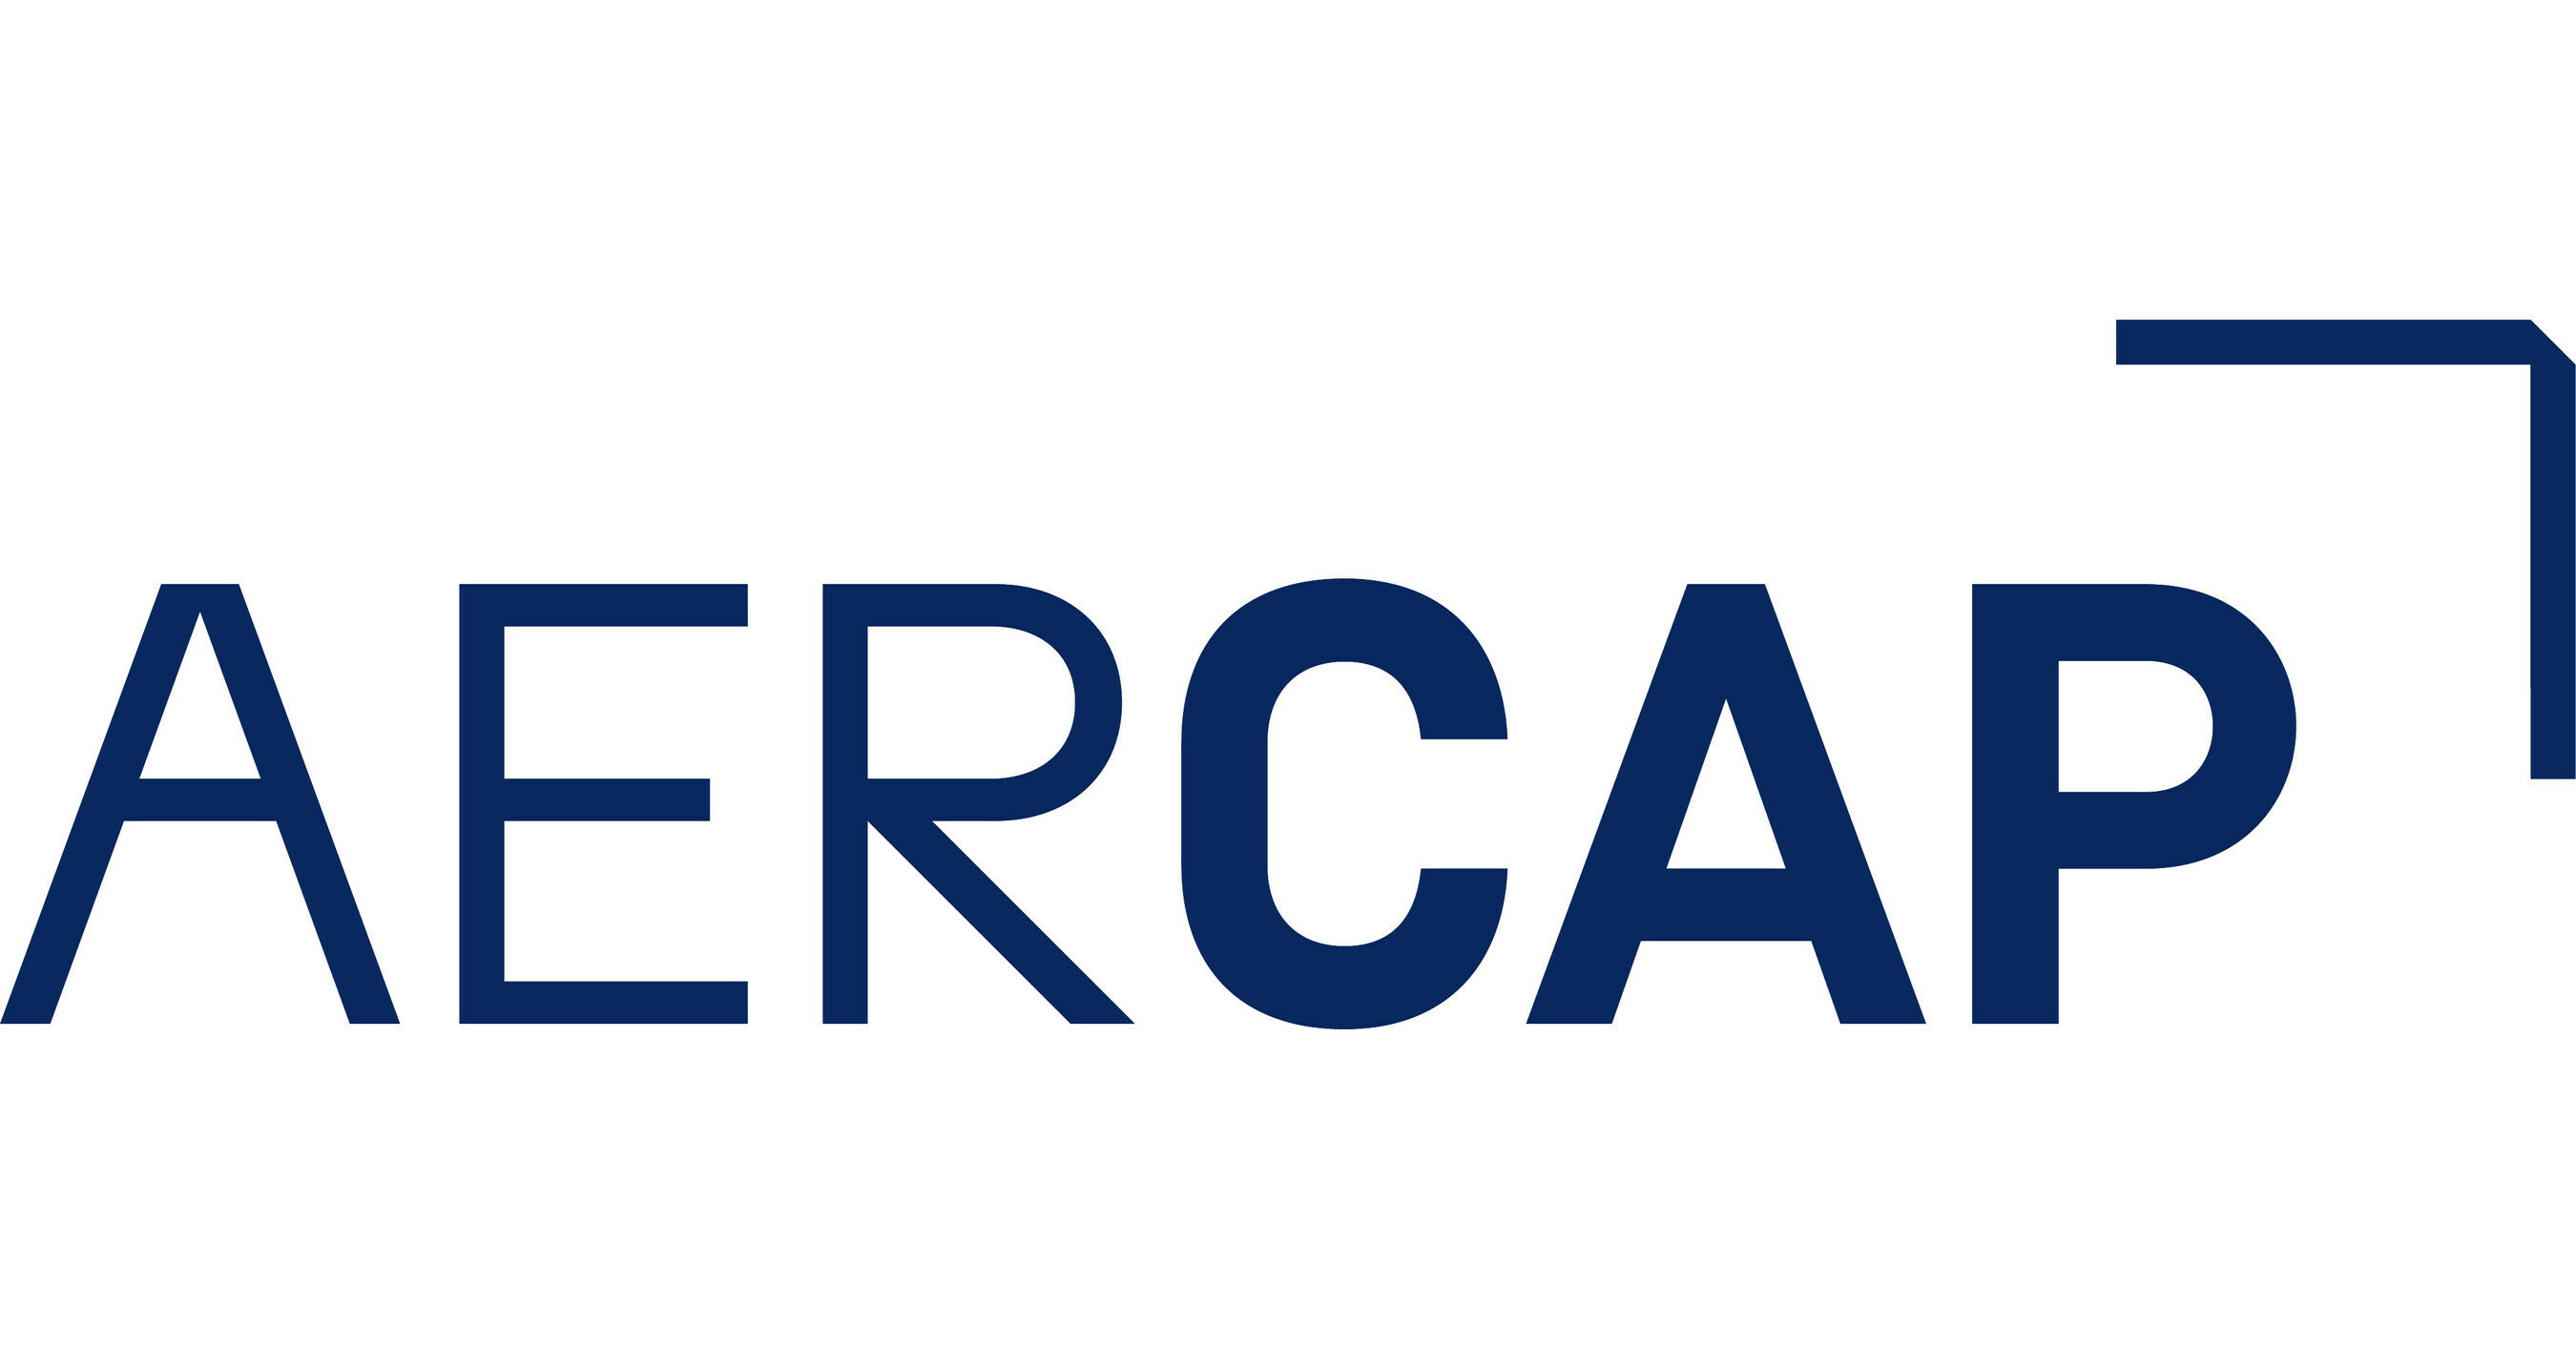 AerCap Holdings N.V. Announces Early Participation Results and Early Settlement Election of Private Exchange Offers of Certain Outstanding Notes for New Notes